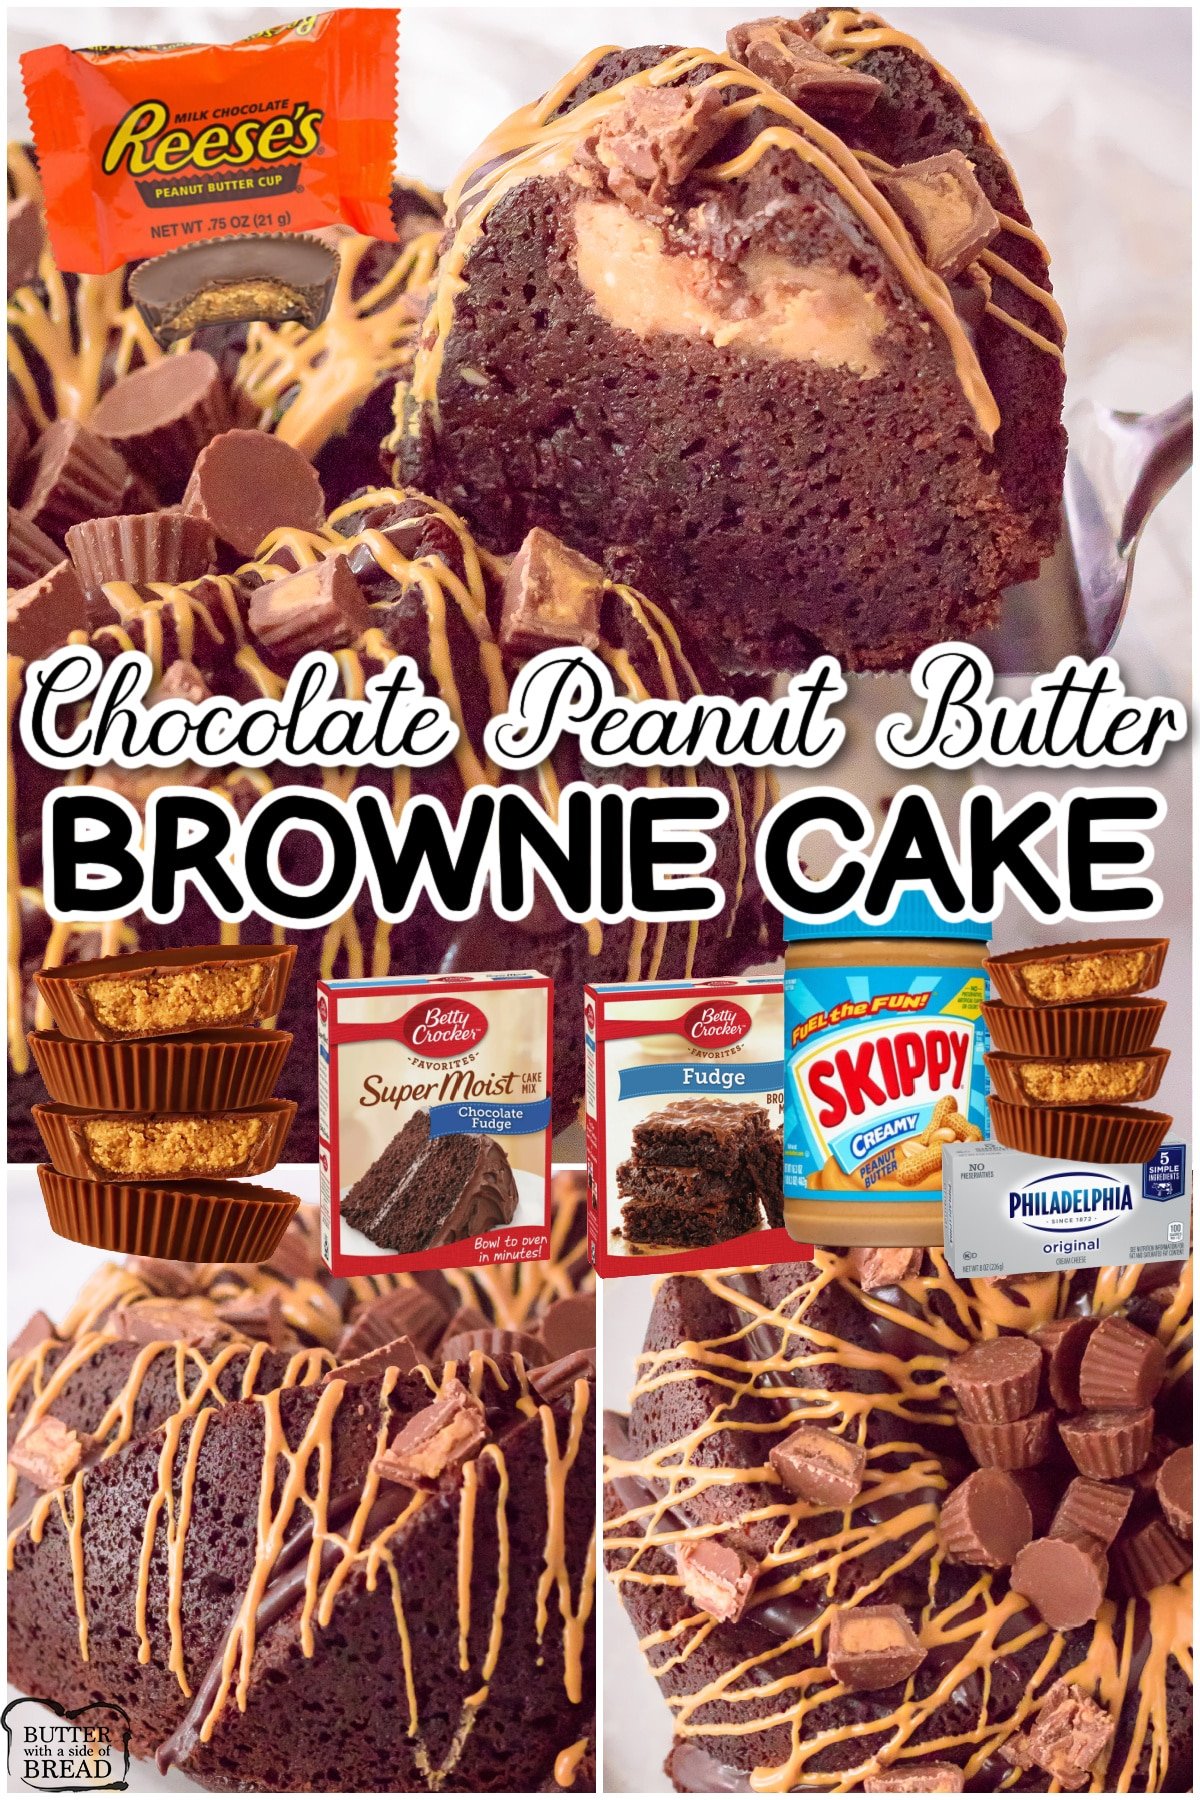 Peanut butter brownie bundt cake made with a cake mix & brownie mix combined! Fudgy chocolate cake filled with a decadent peanut butter cheesecake & drizzled with chocolate!